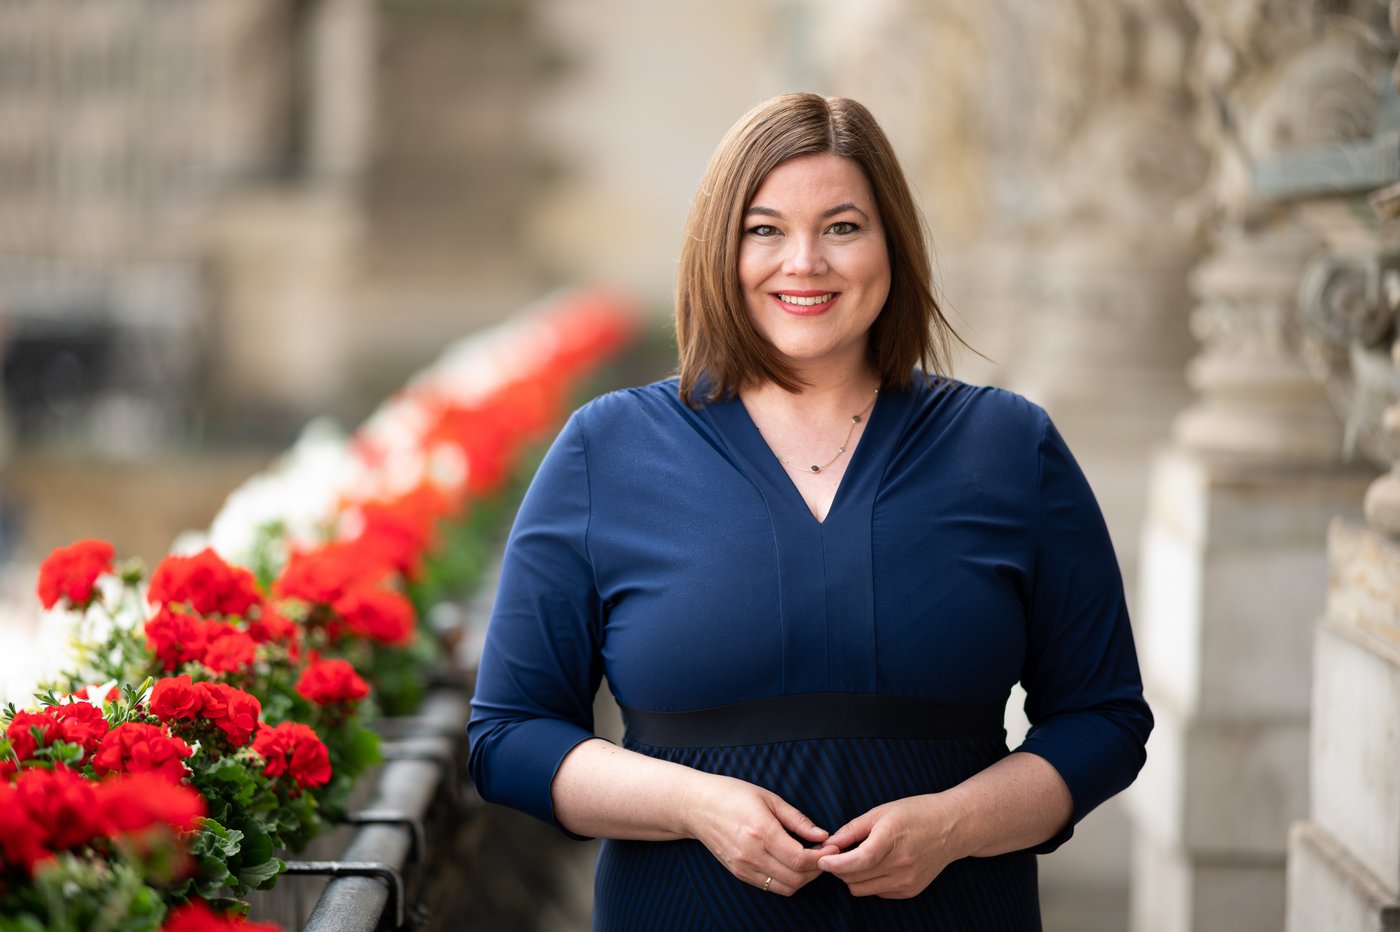 Katharina Fegebank: a politician on a balcony. On the left are red flowers, on the right the bright walls of Hamburg City Hall. Katarina Fegebank wears shoulder-length brown hair and a blue dress. In front of the middle of her body, the fingertips of her two hands are touching.